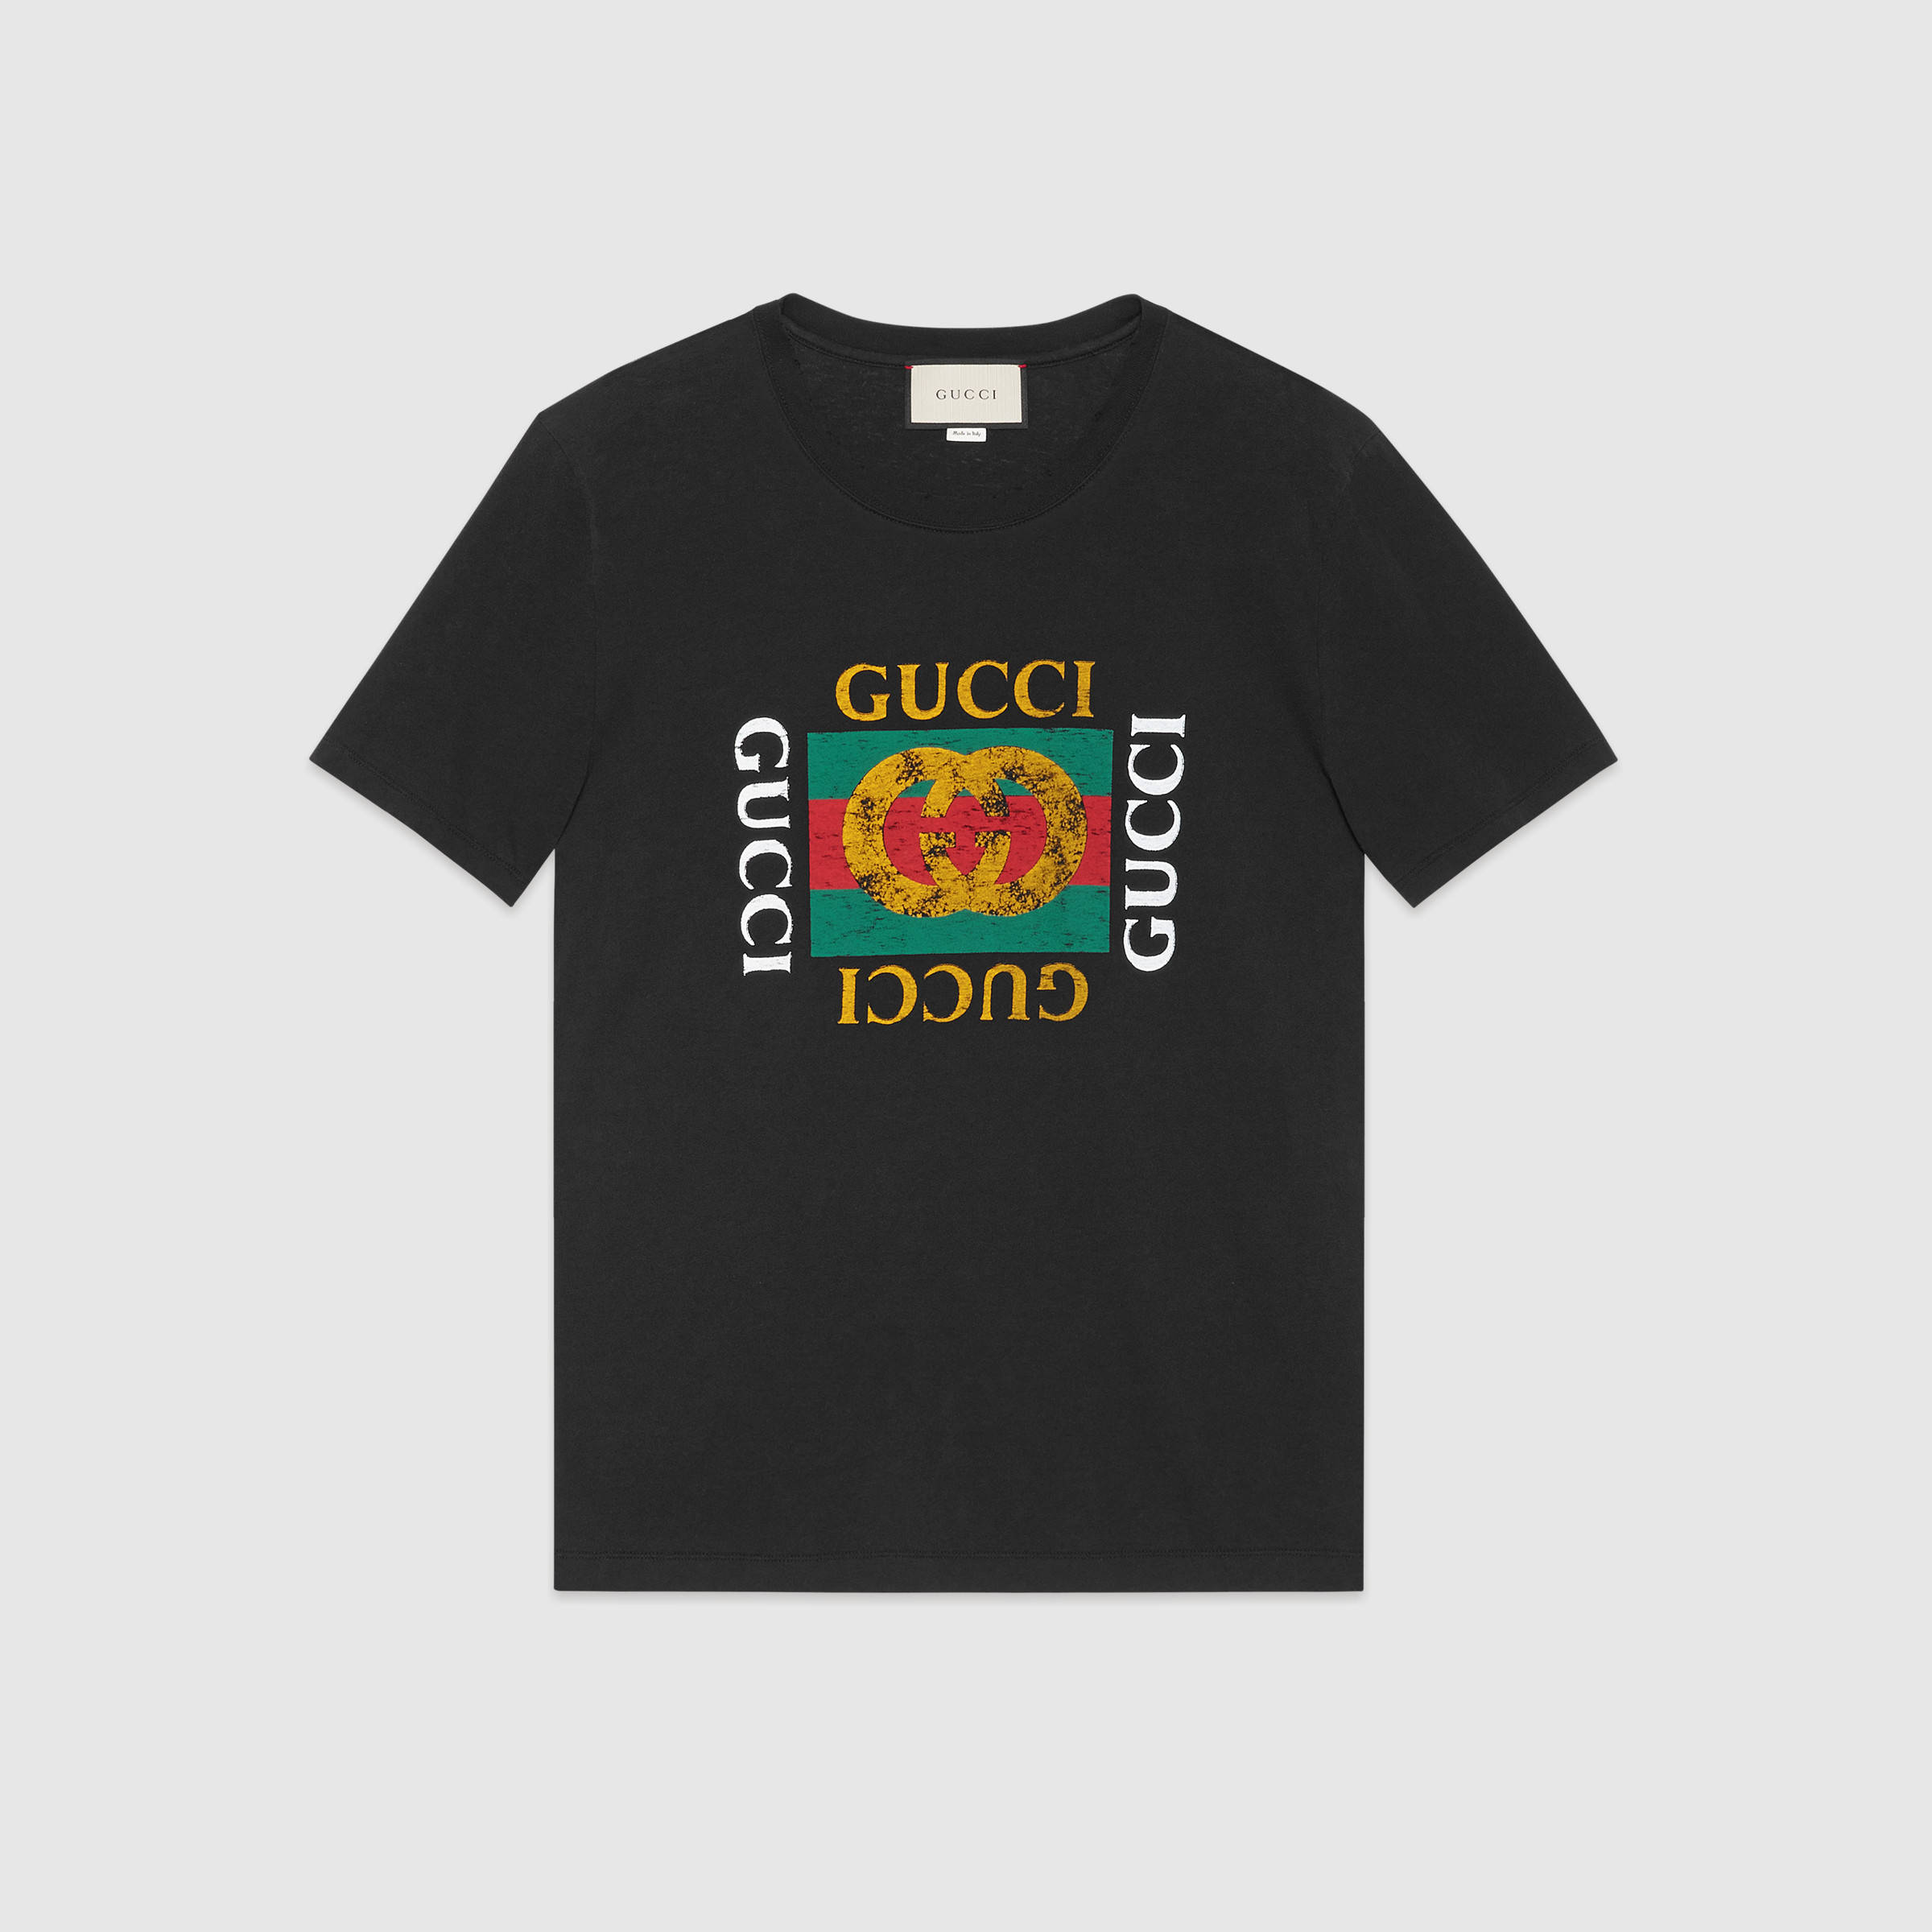 Gucci Pics, Products Collection